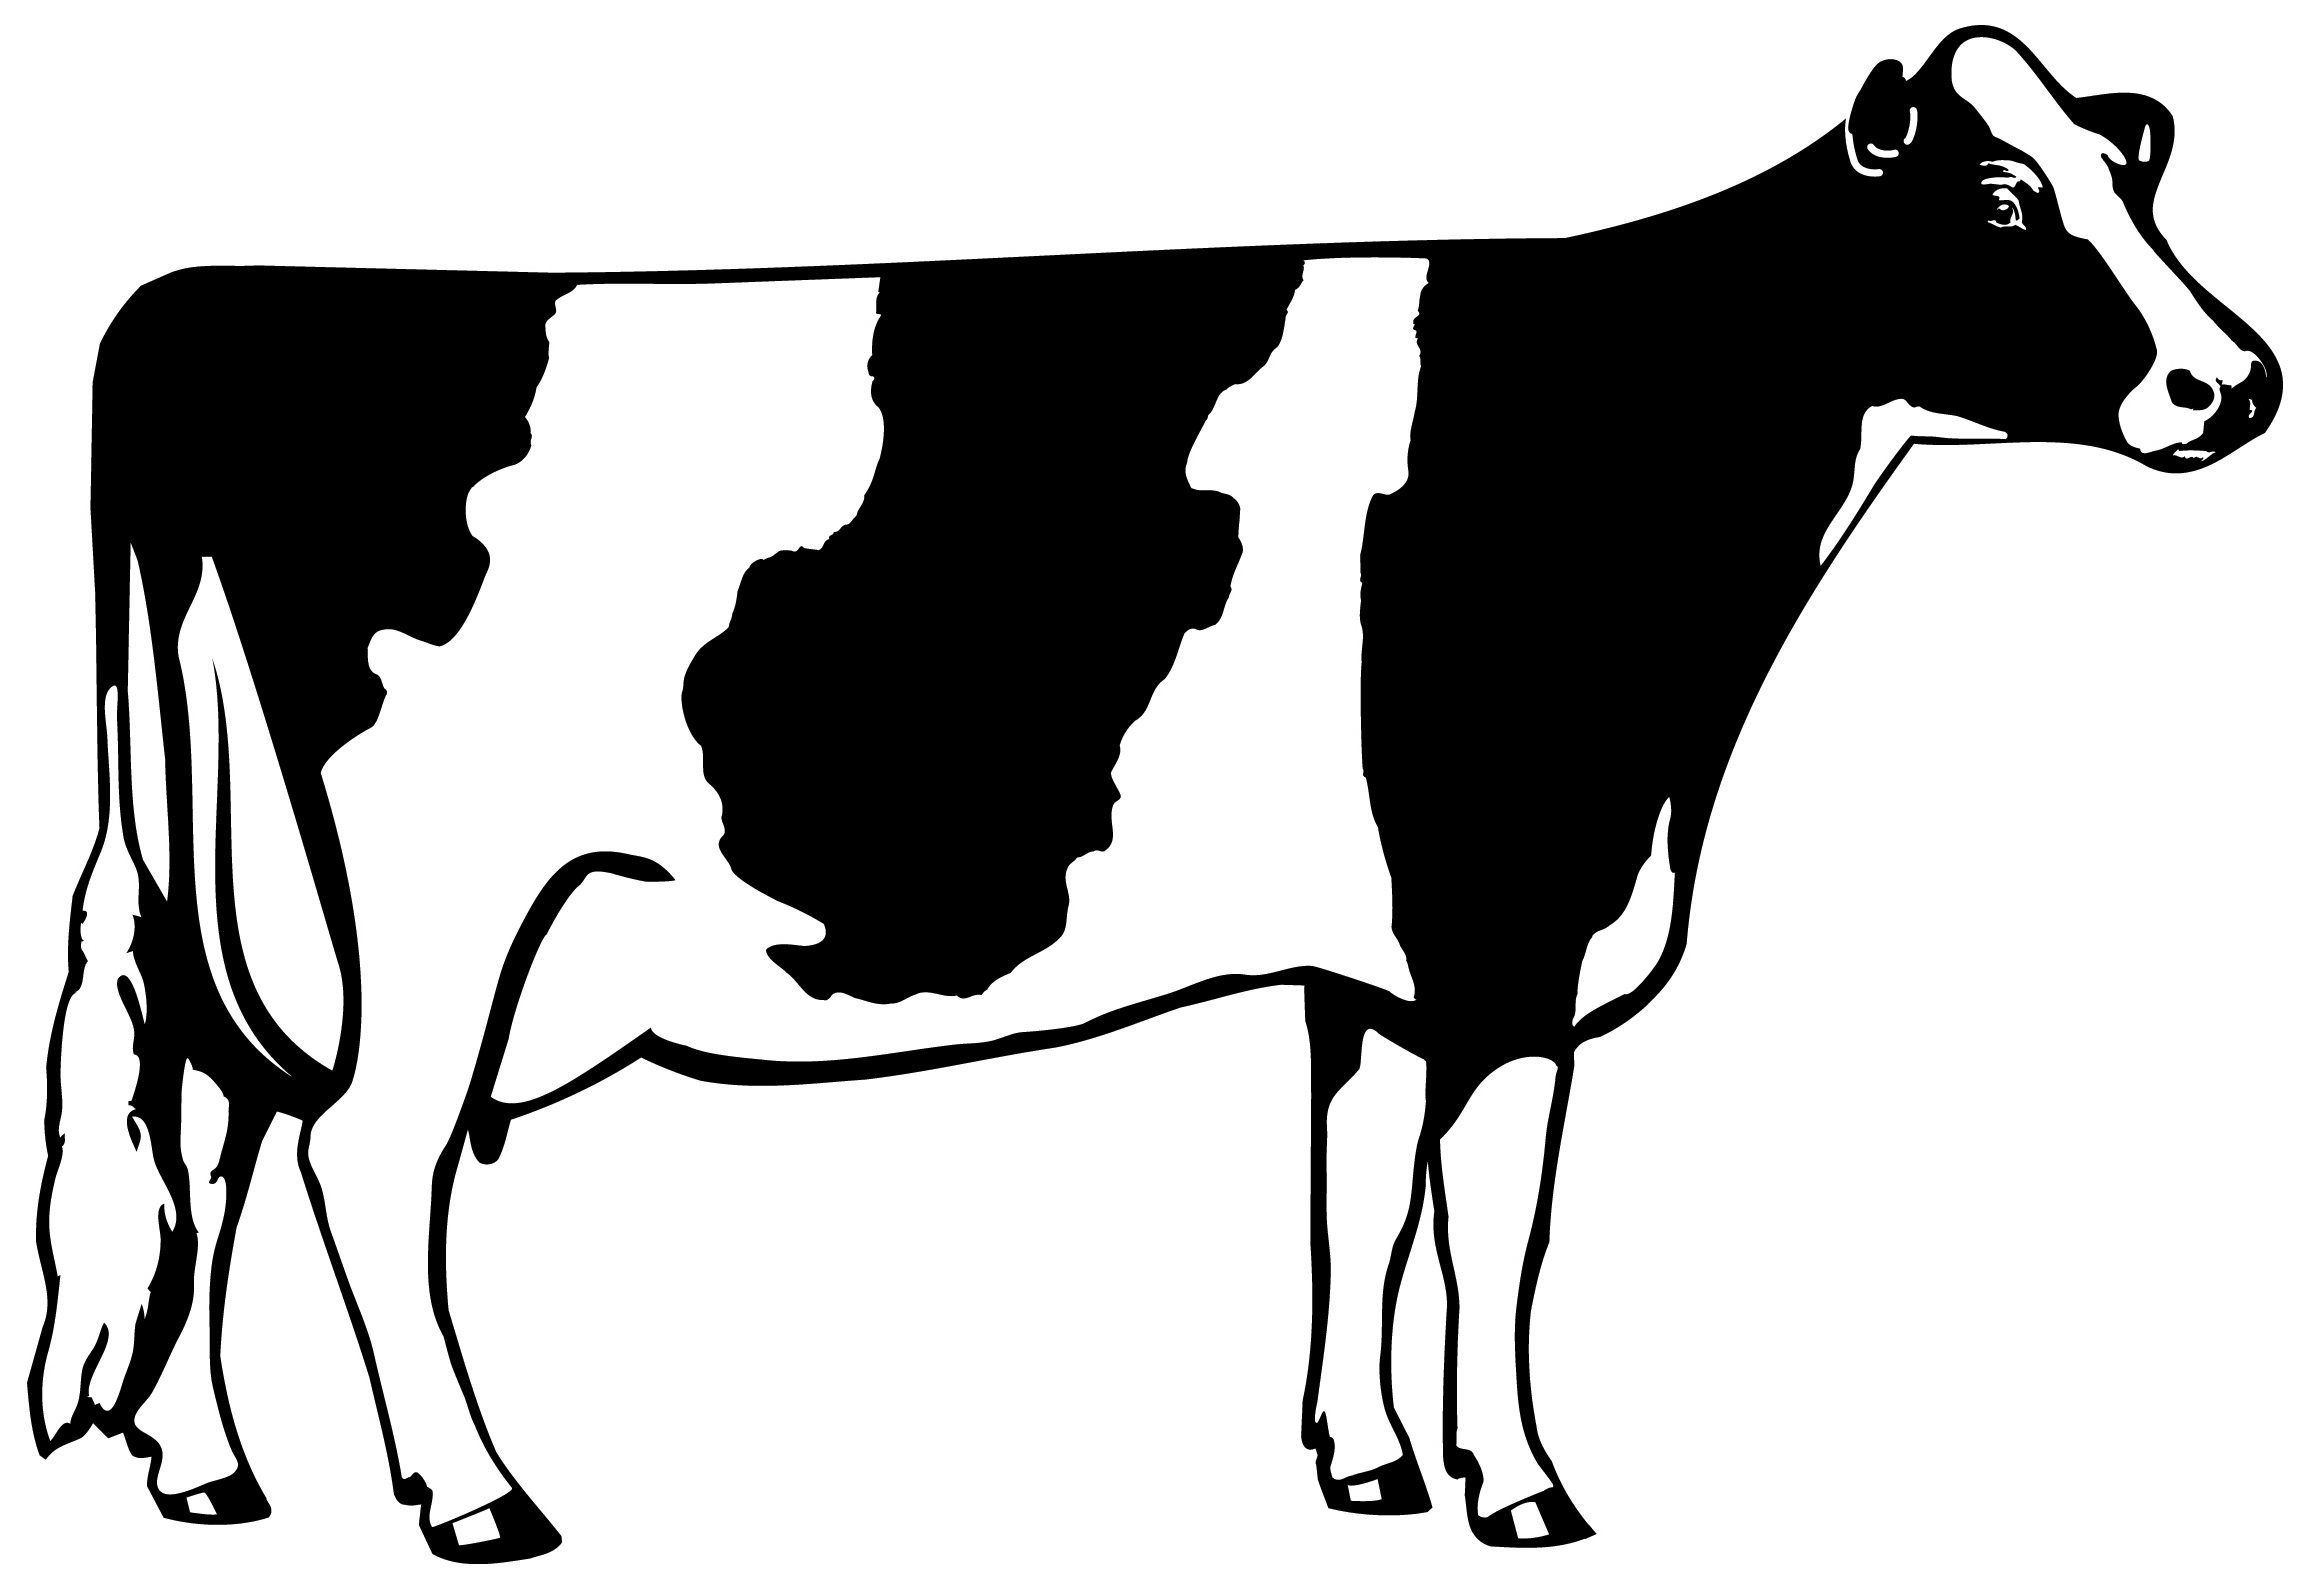 Cattle clipart logo. Silhouette clip art at